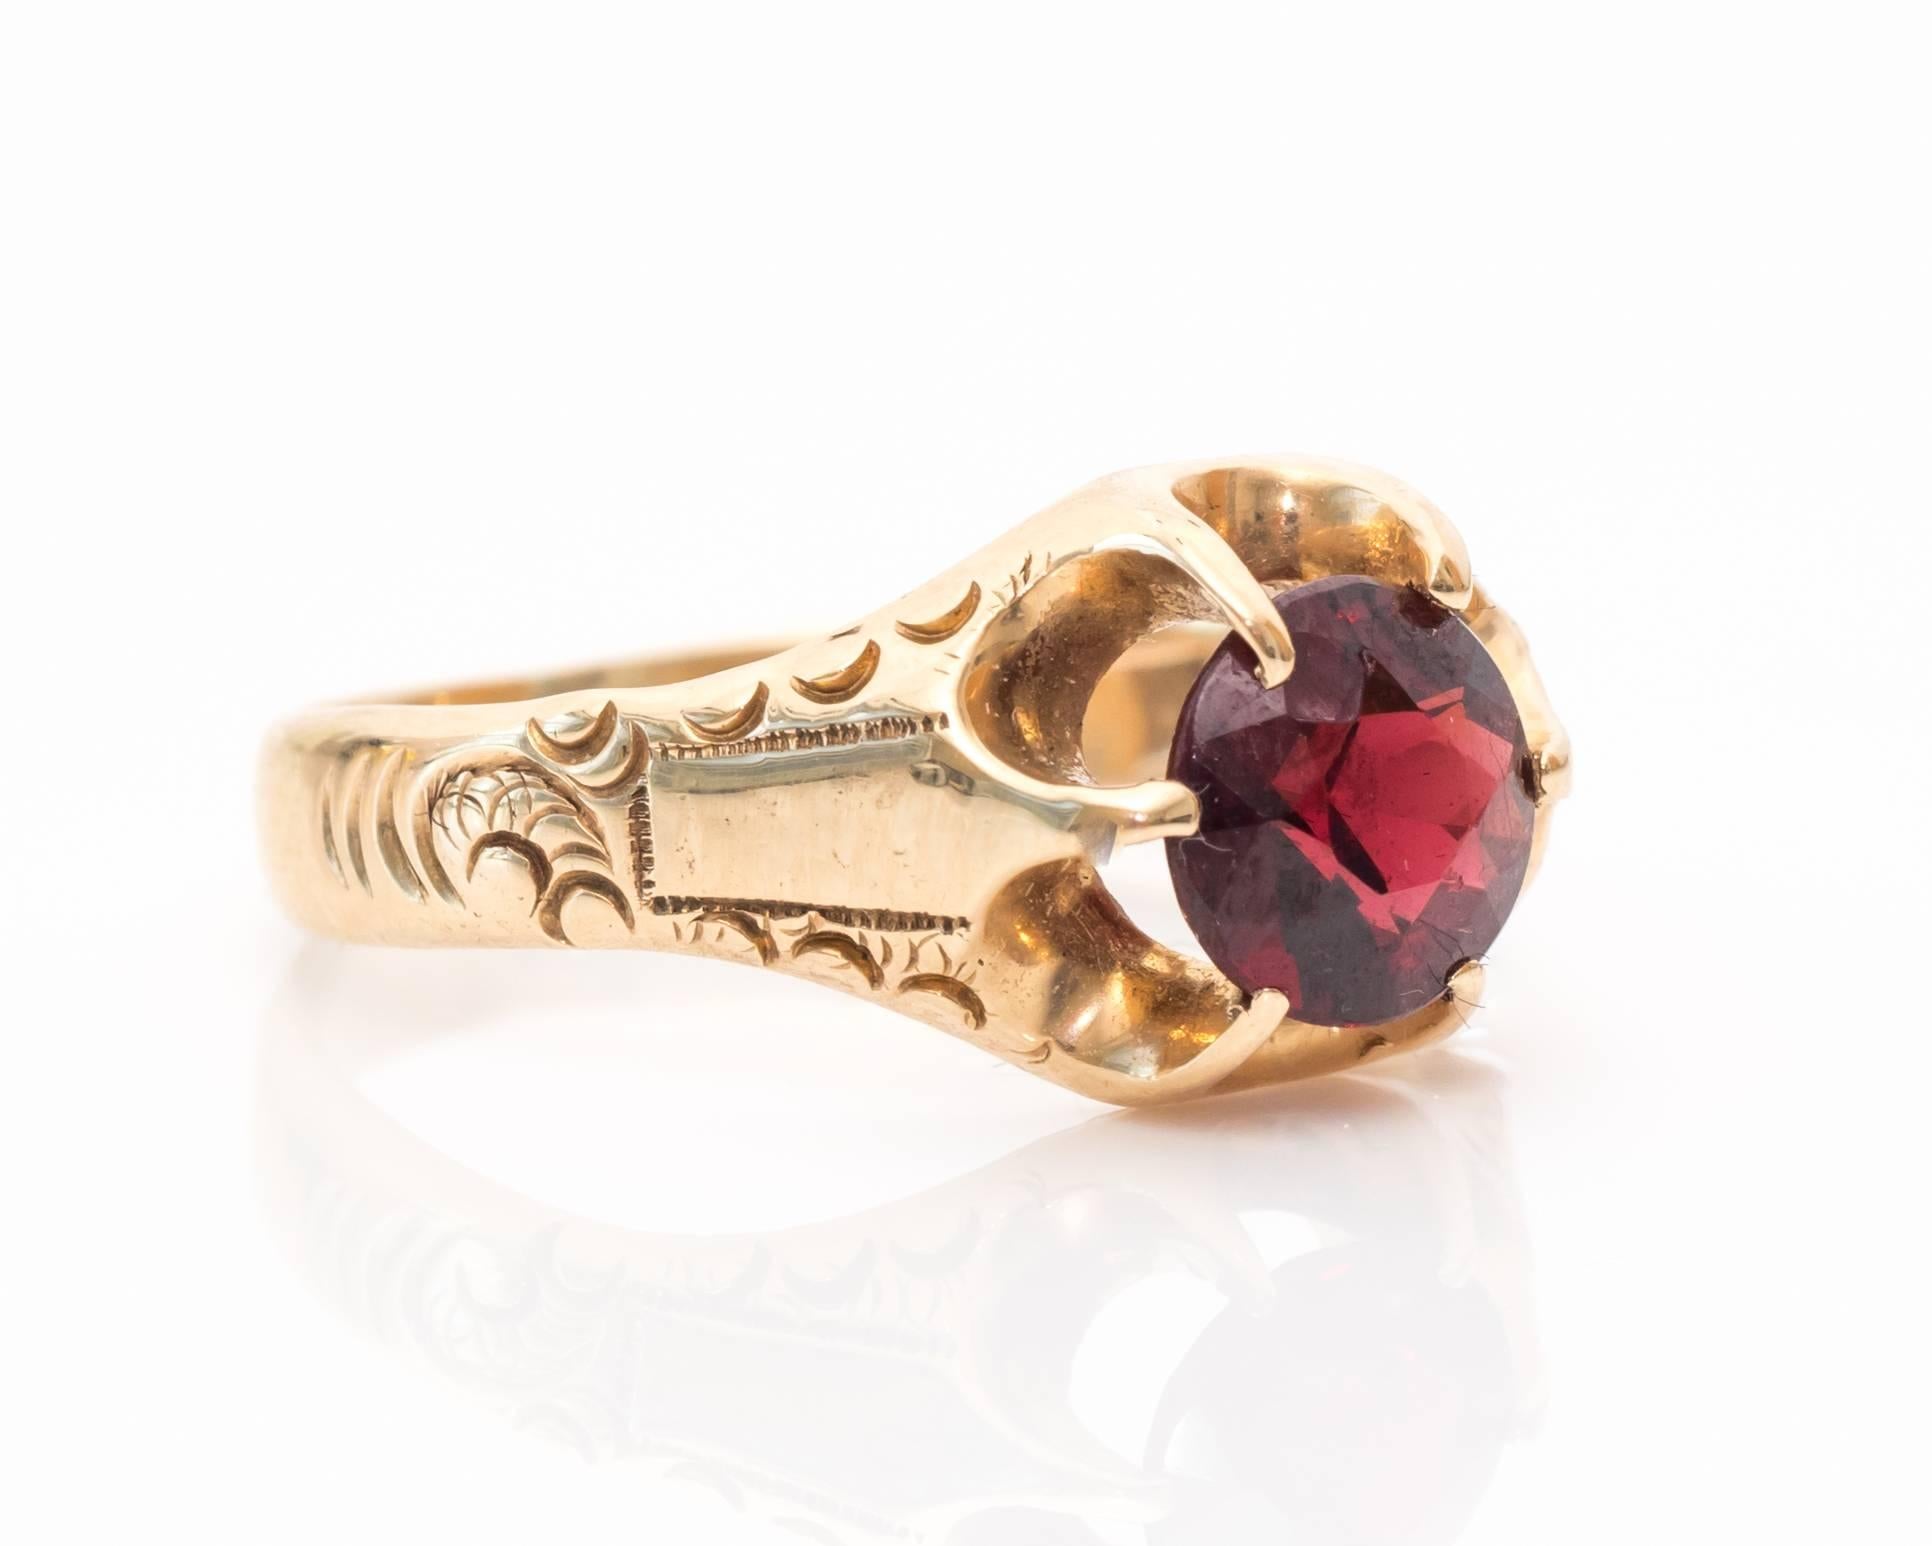 Gorgeous Red-Stone (Likely Garnet but hard to test due to the unique prong-set) and Yellow Gold Cocktail Ring!
There are six prongs mounted around the ring with large U-shaped galleries between each prong. The entire gemstone is visible due to this